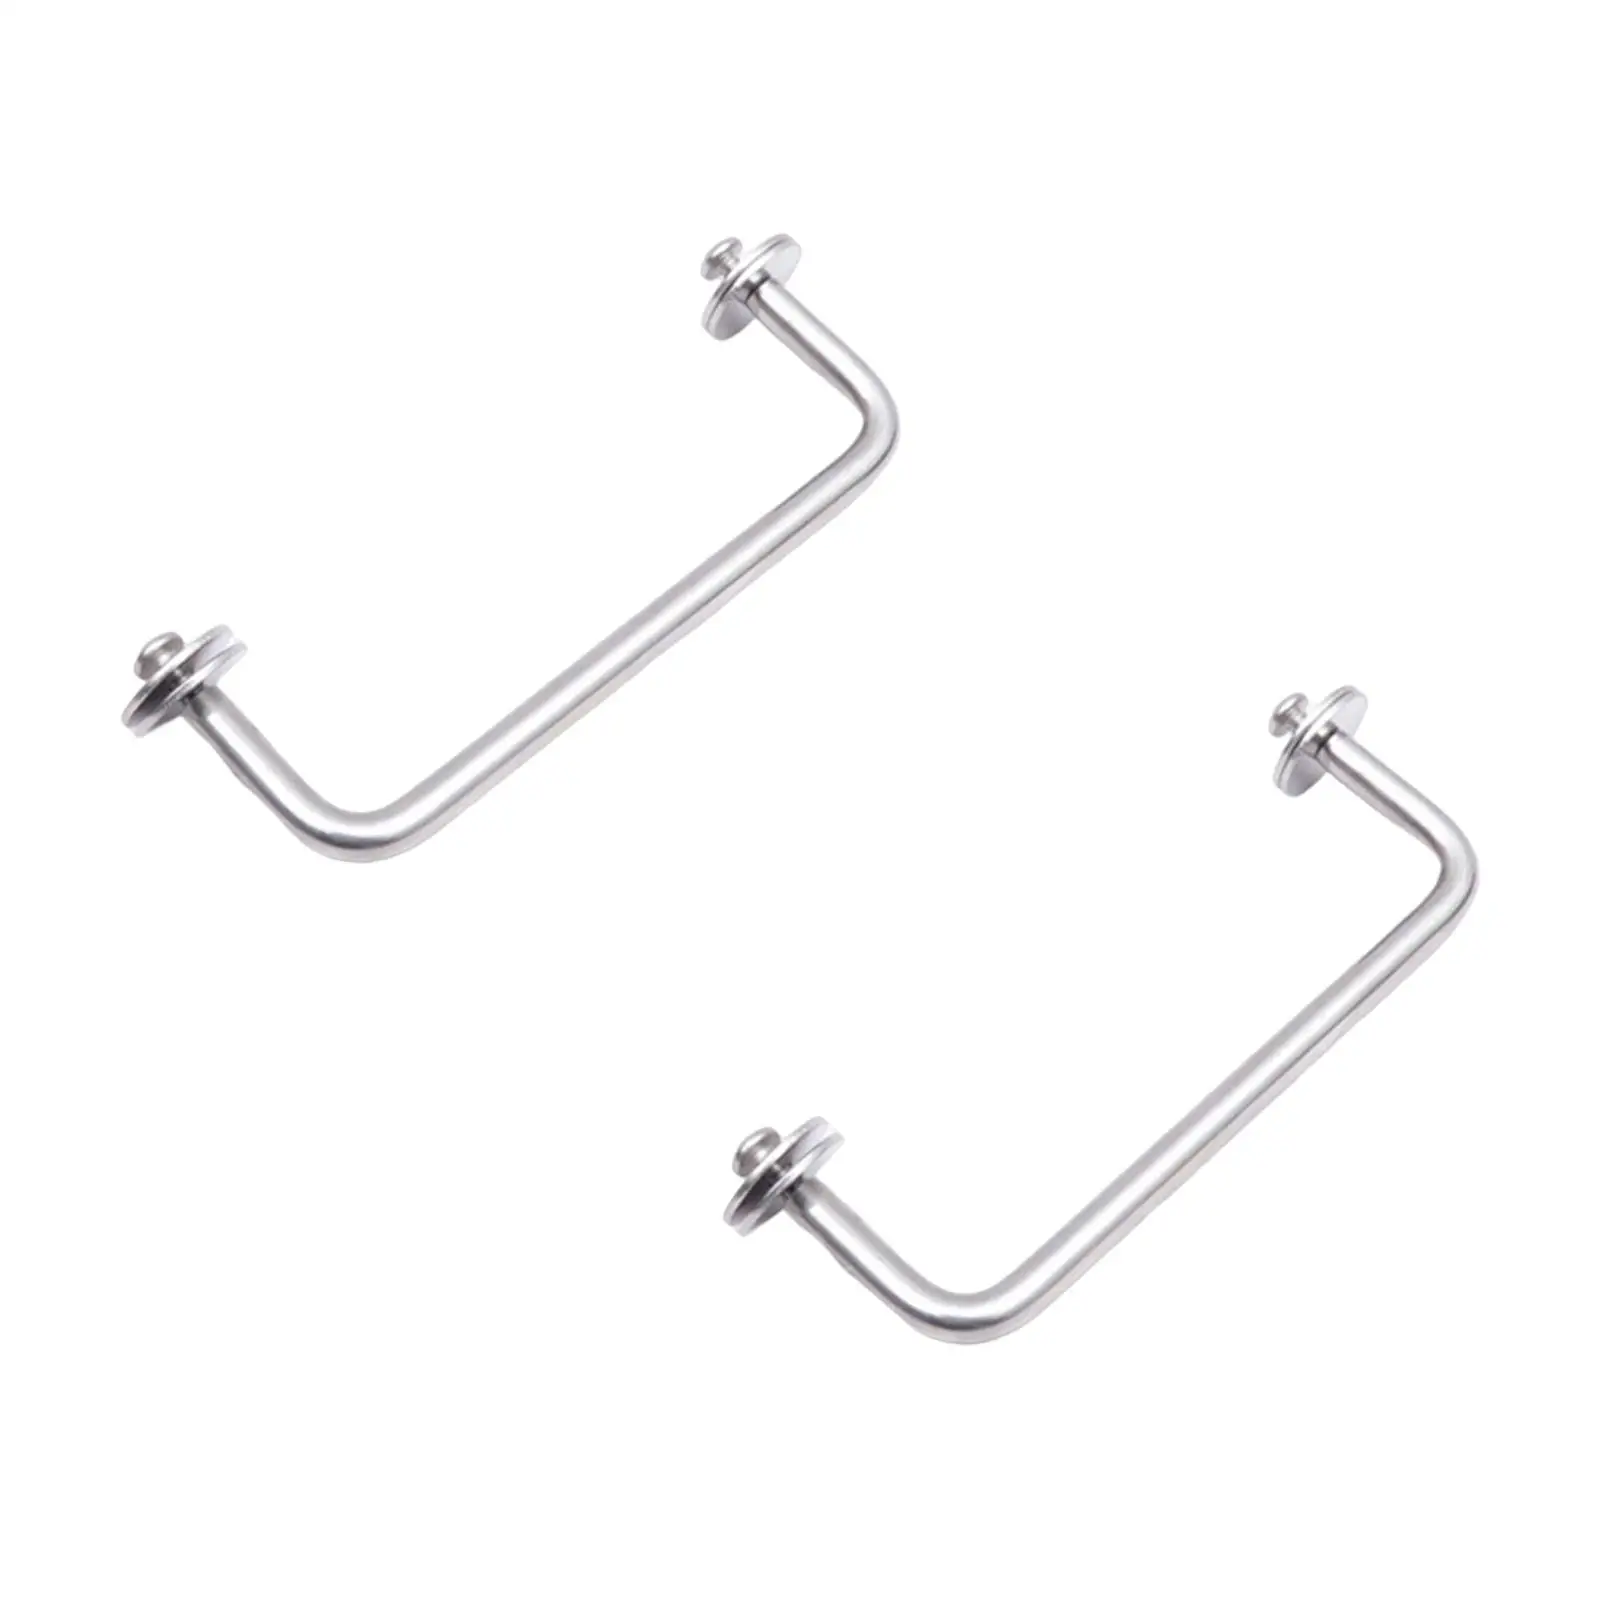 2Pieces Scuba Diving Buttplate Handle Stainless Steel Hardware Dive Rail for Fishing Kayaking Snorkeling Accessories